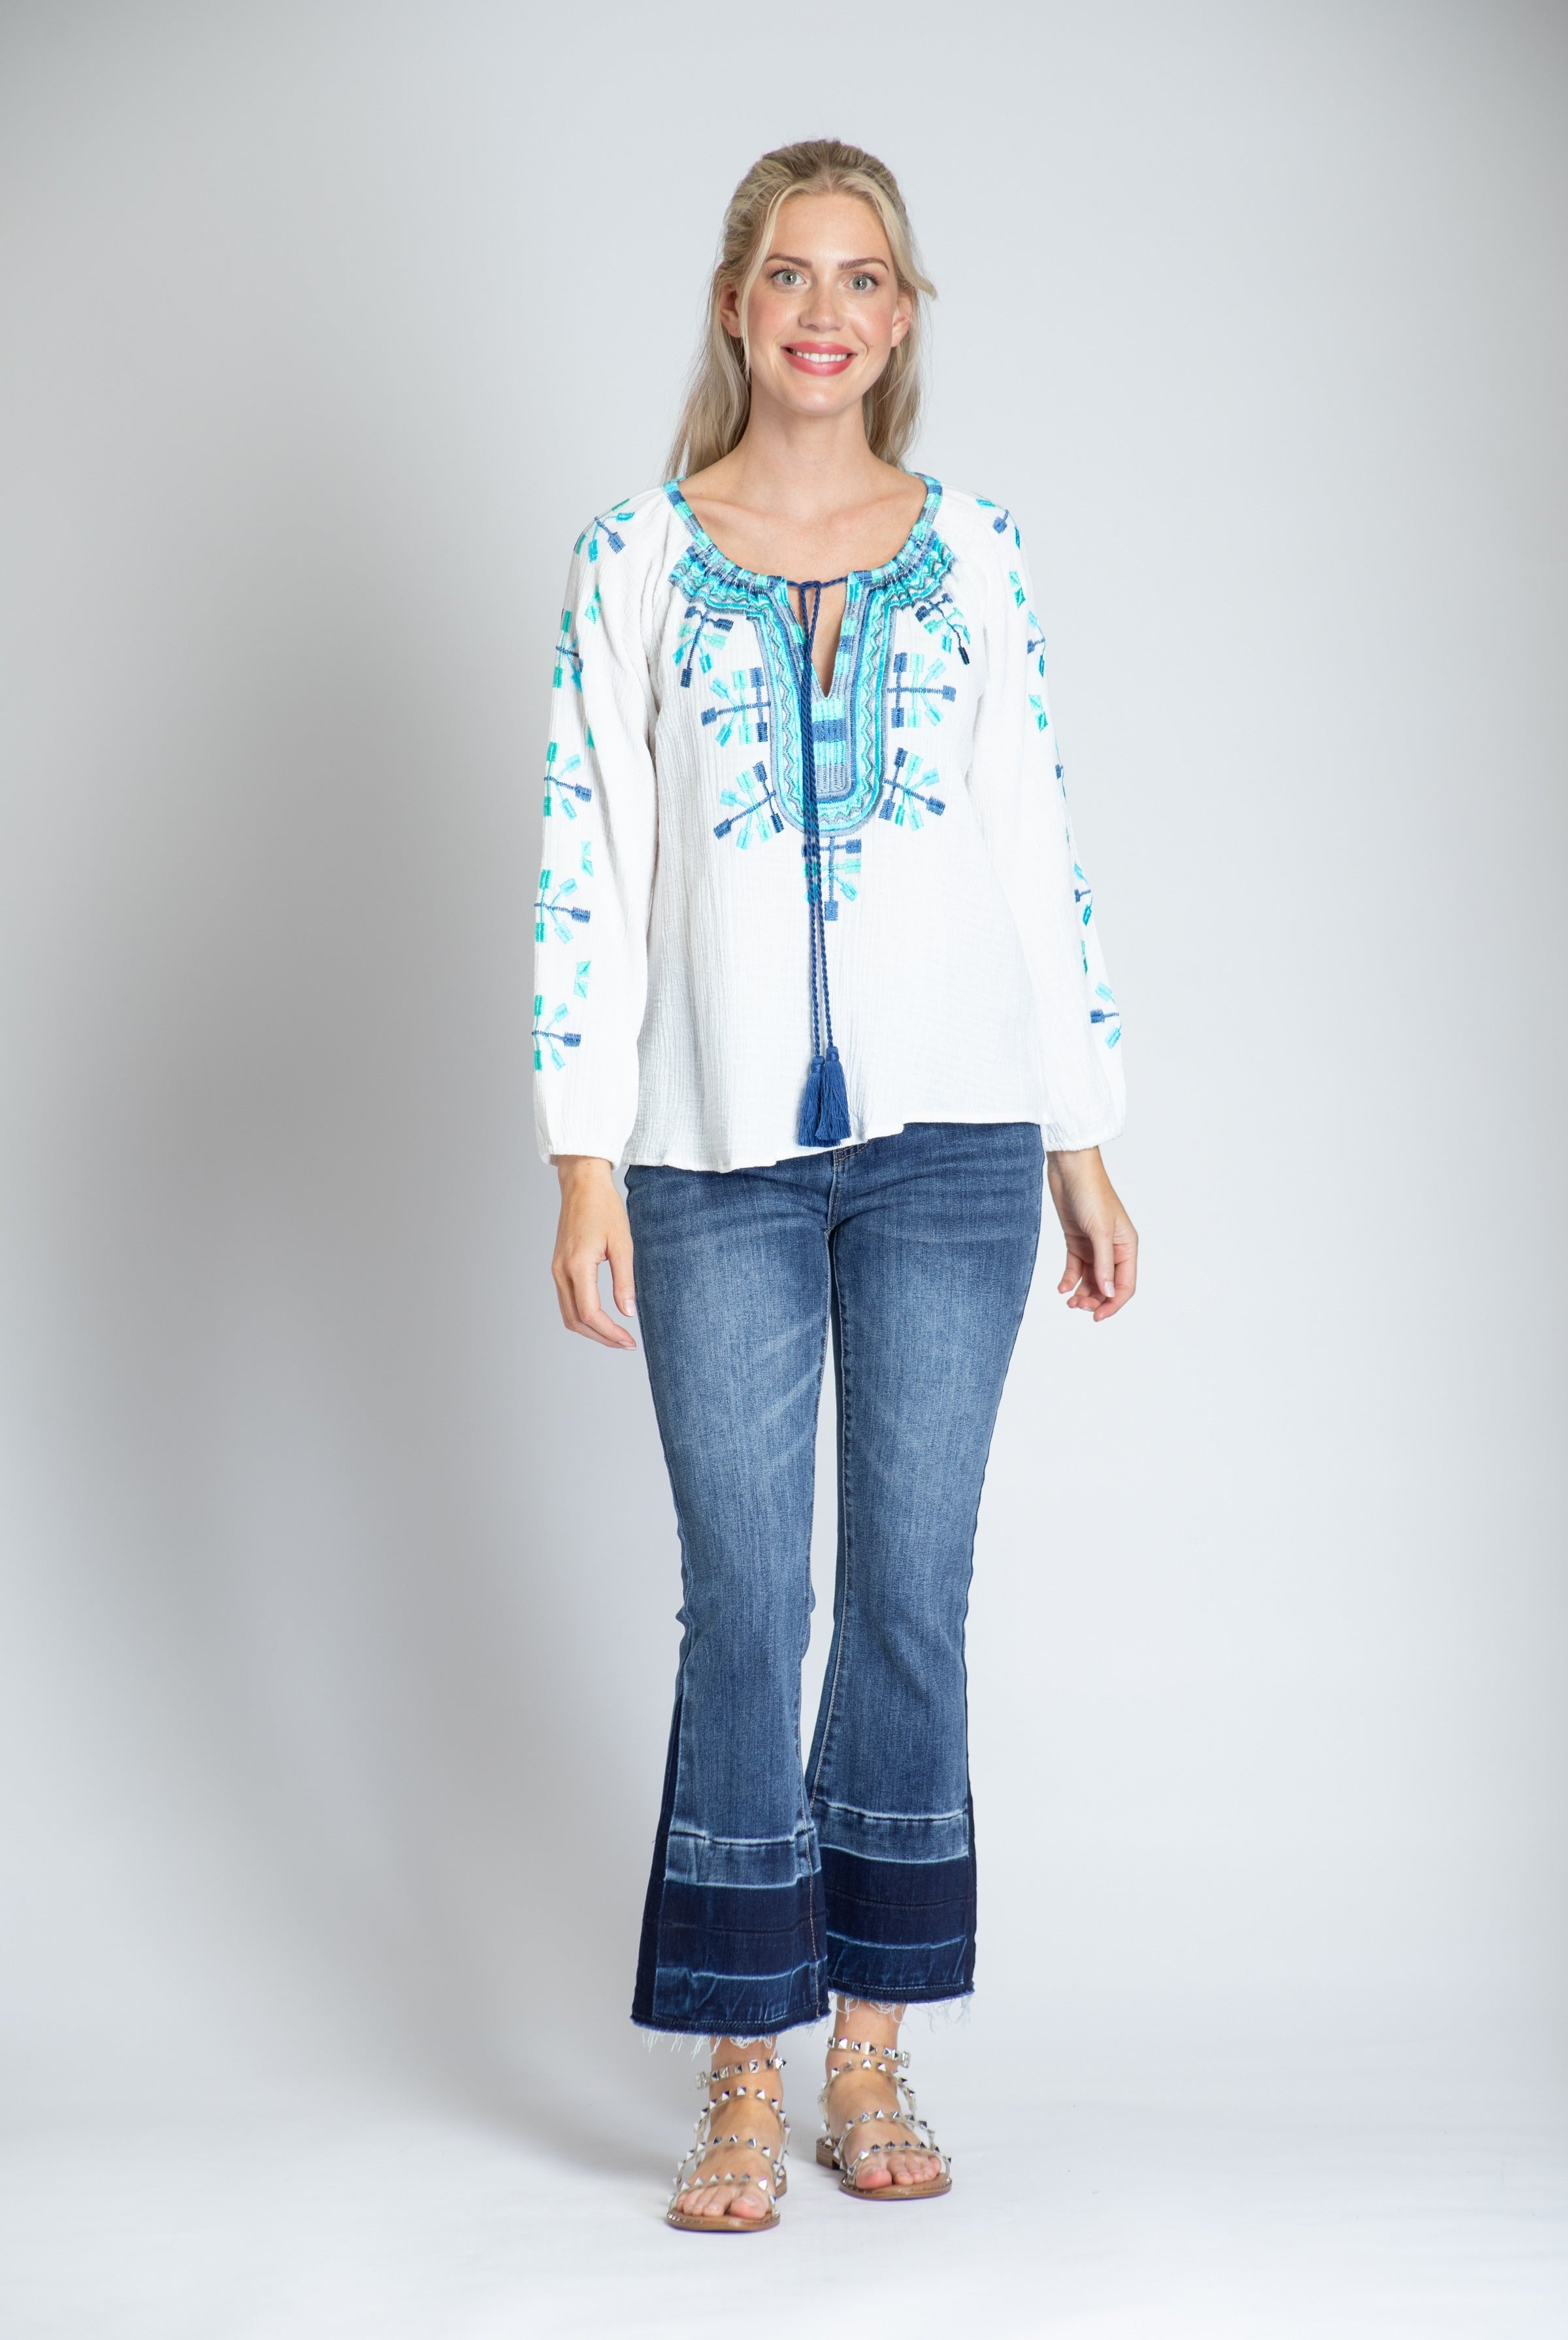 Embroidered Peasant Top With Tassels - White Multi